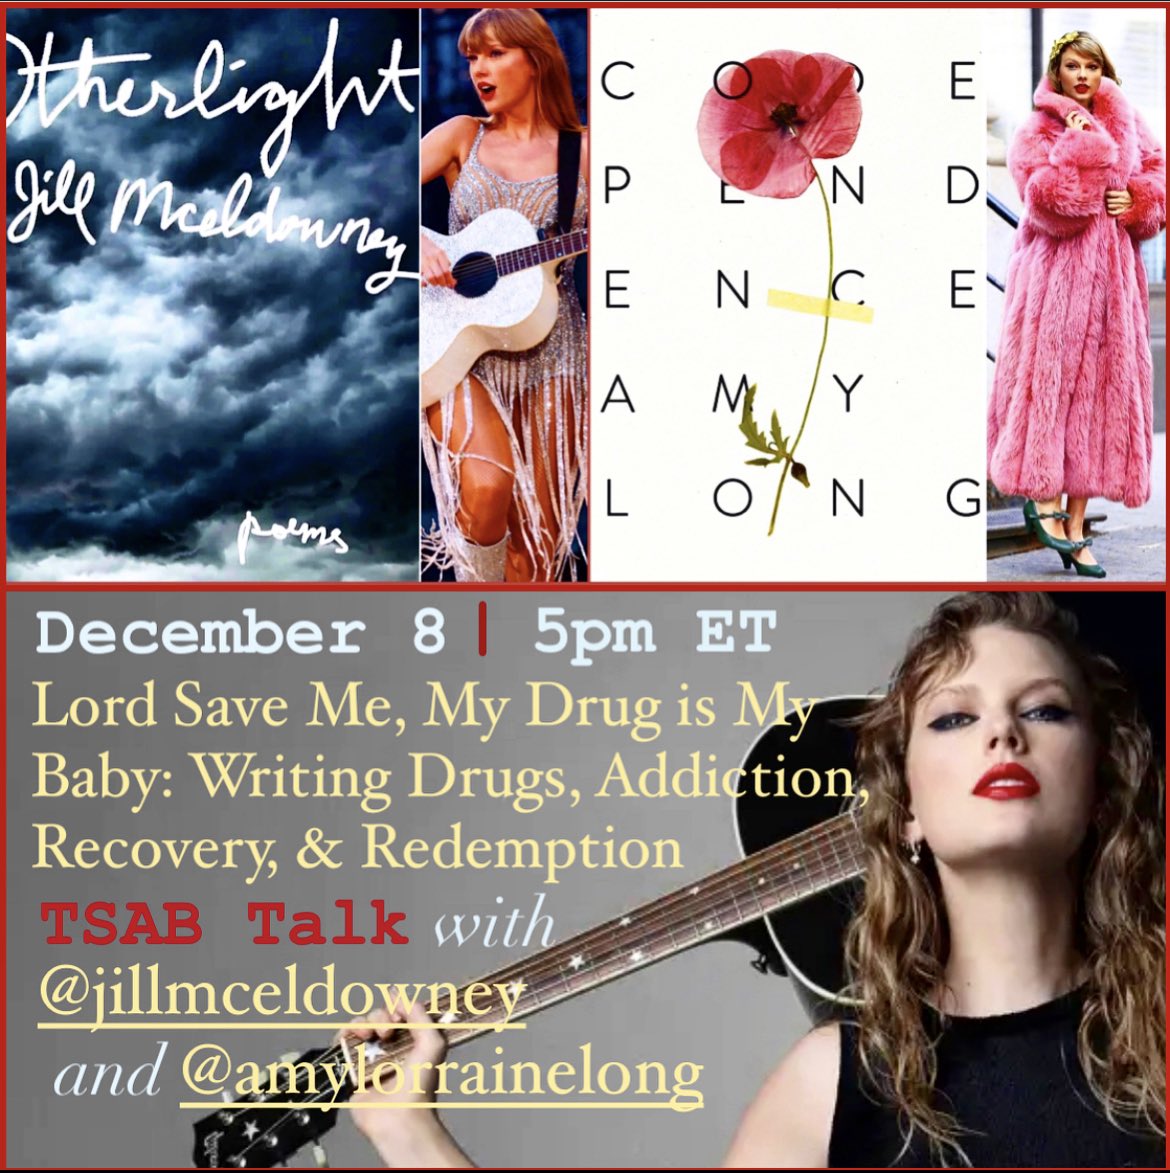 TONIGHT (as in Thursday, December 8): TSAB EIC @amylorrainelong talks to @jillmceldowney about one of their favorite genres (drug lit), maybe dish a little about Taylor Swift, and tell morbidly funny stories. 5pm ET/4pm CT/2pm PT.